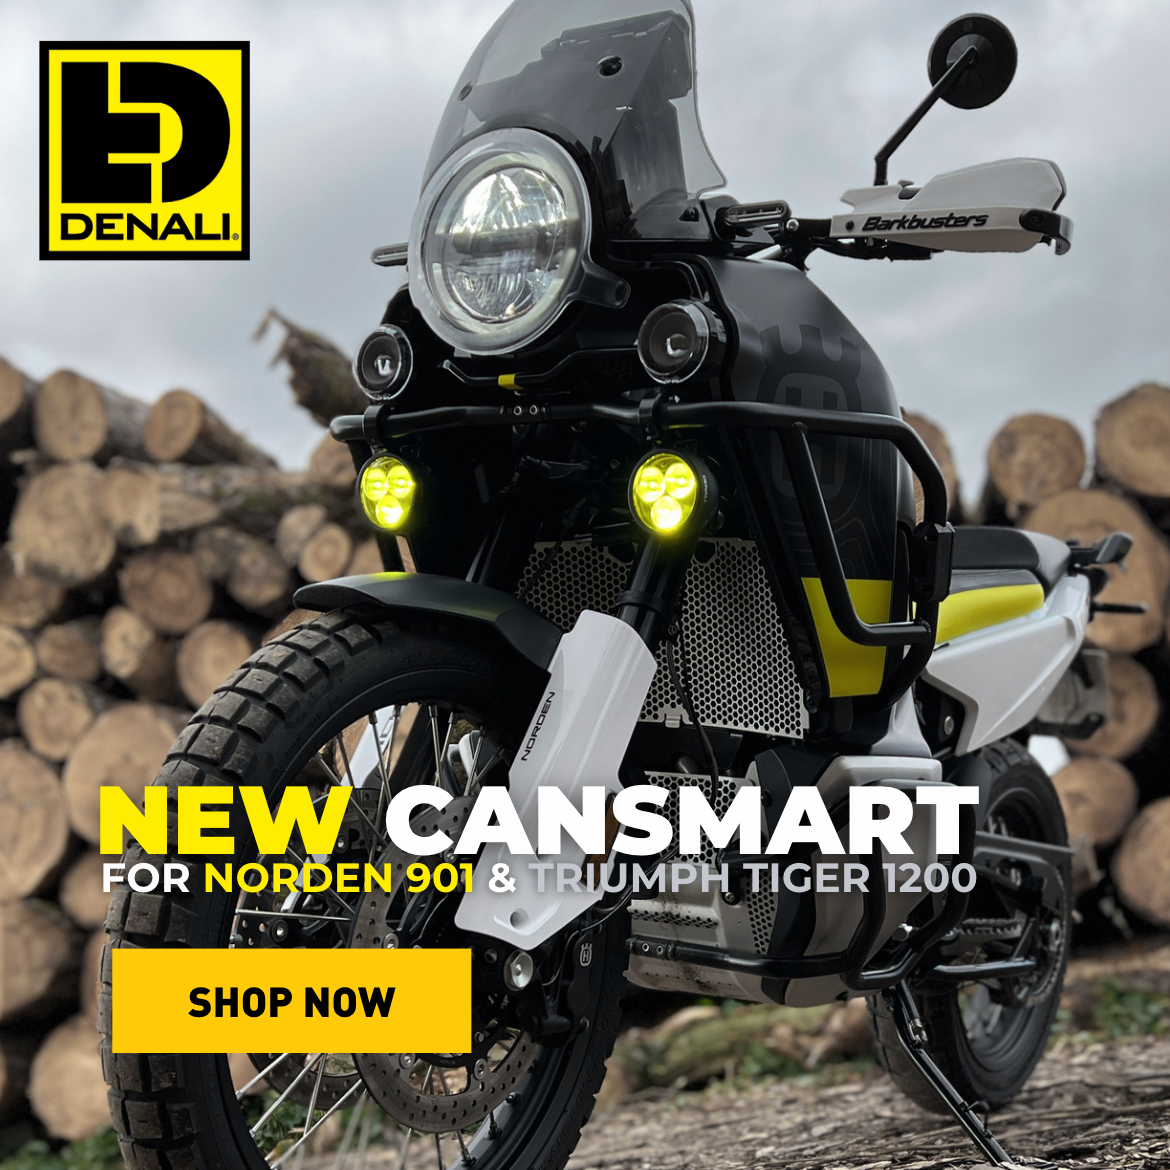 New CanSmart for Norden 901 and Triumph Tiger 1200 - Shop Now